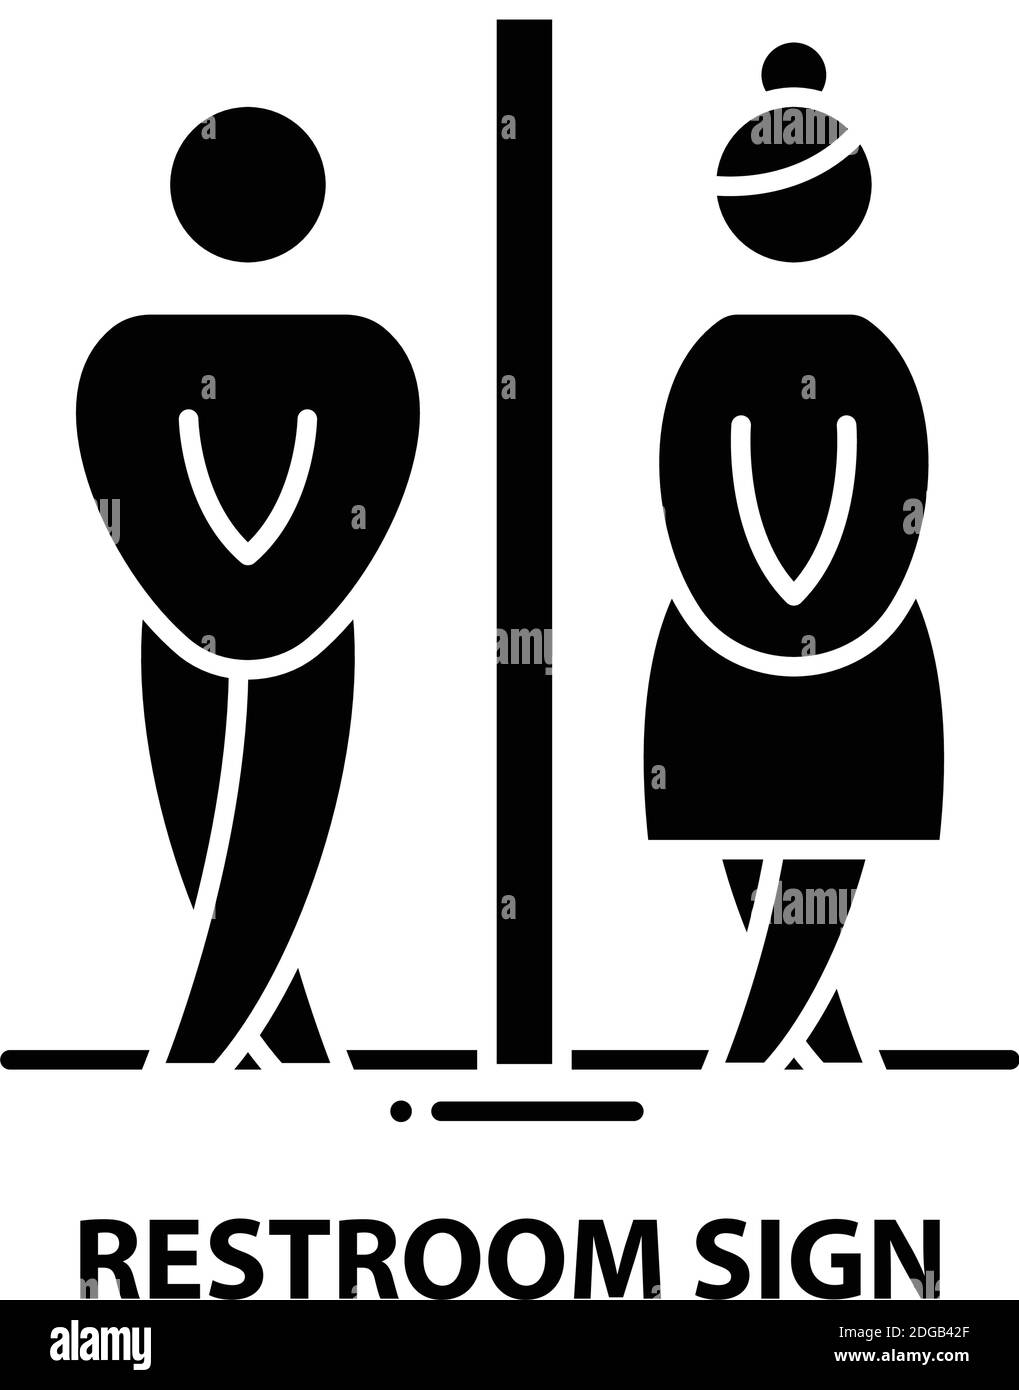 restroom sign symbol icon, black vector sign with editable strokes, concept illustration Stock Vector